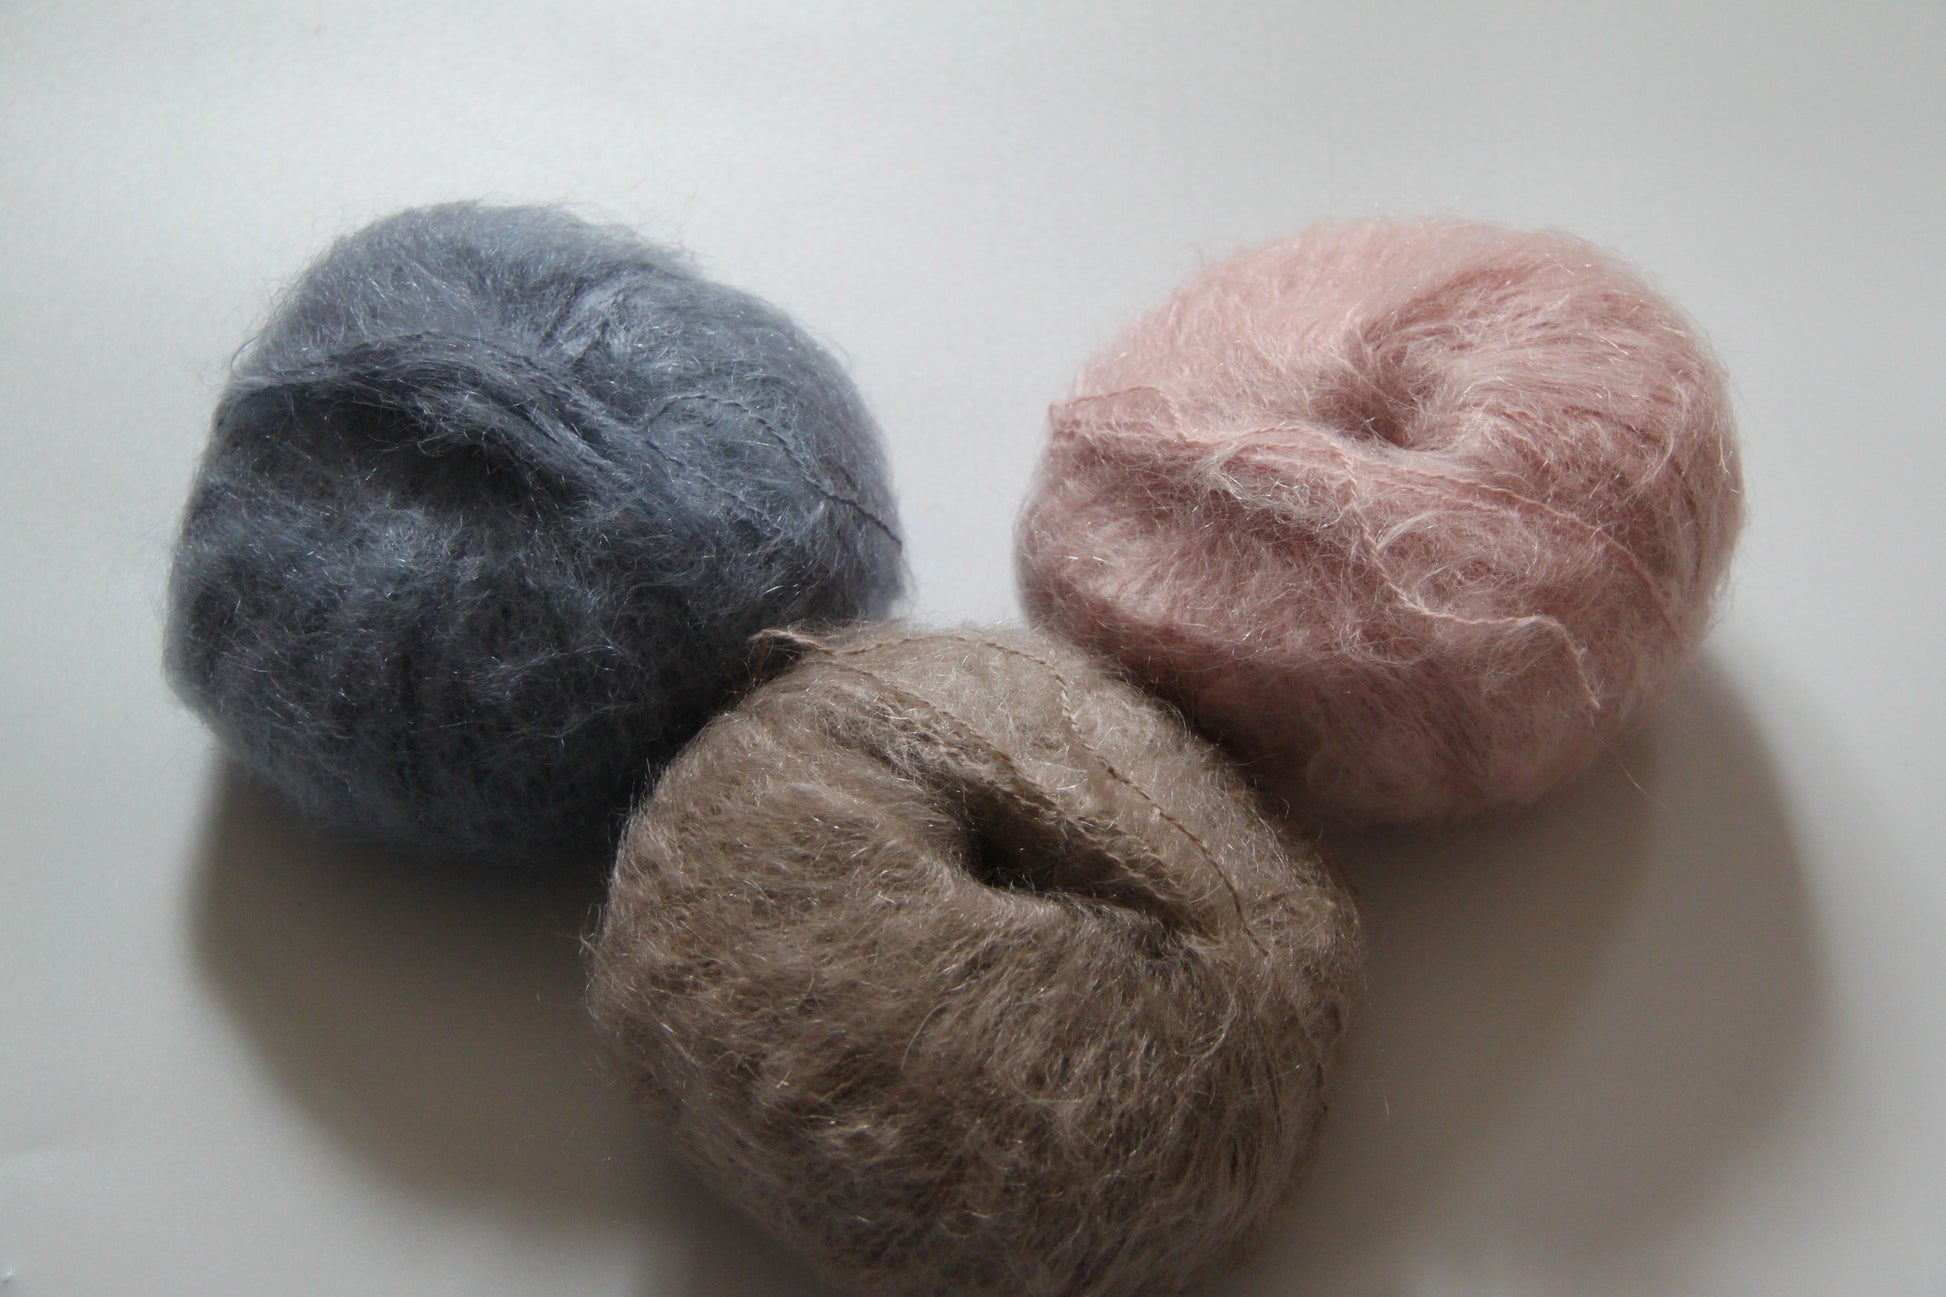 My Complete Lion Brand Truboo Yarn Review - Budget Yarn Reviews